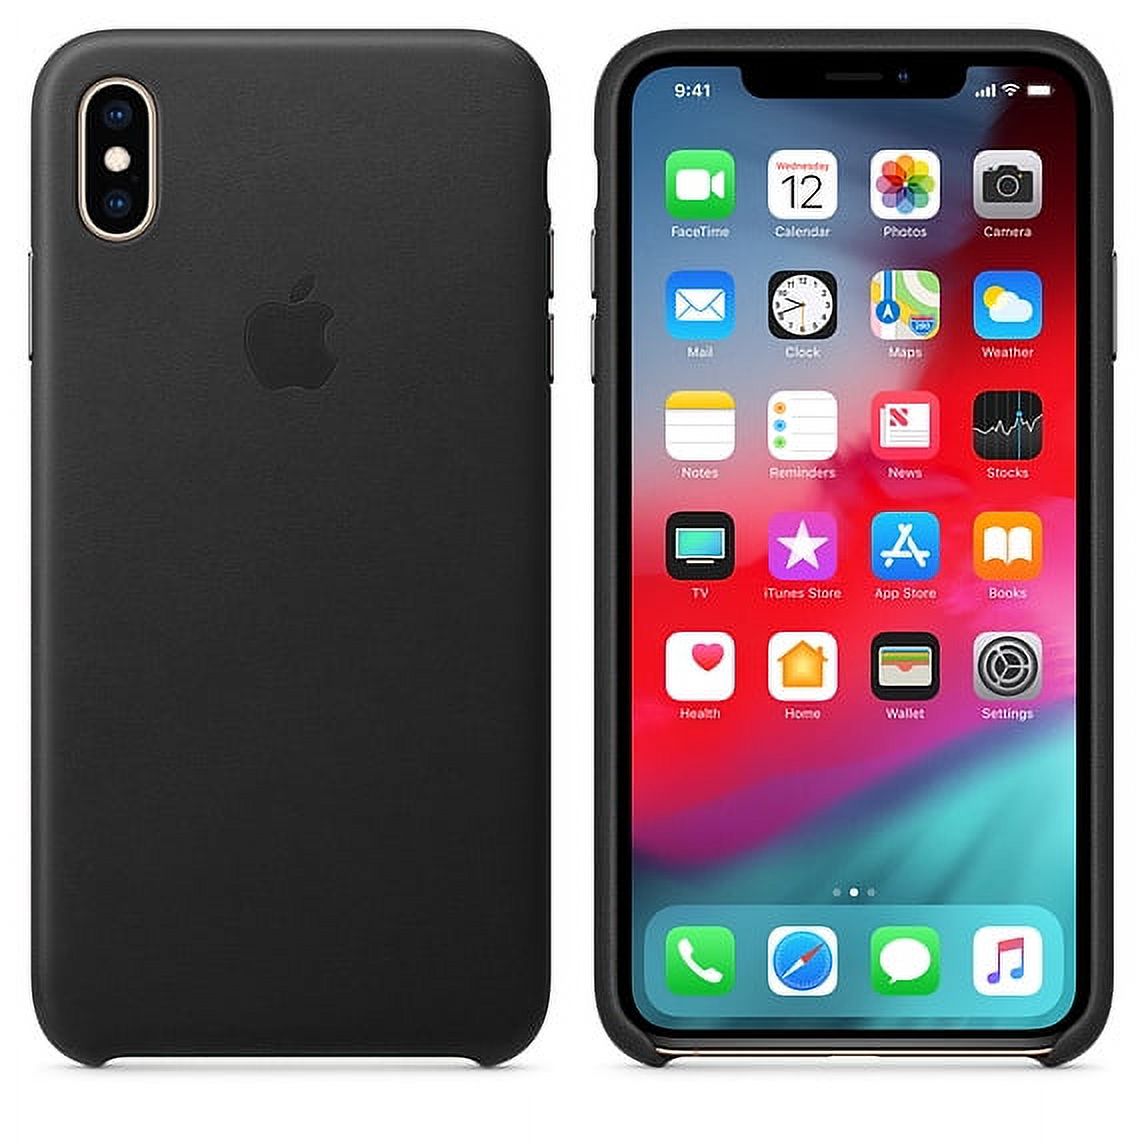 Apple Leather Case for iPhone XS Max - Black - image 2 of 8